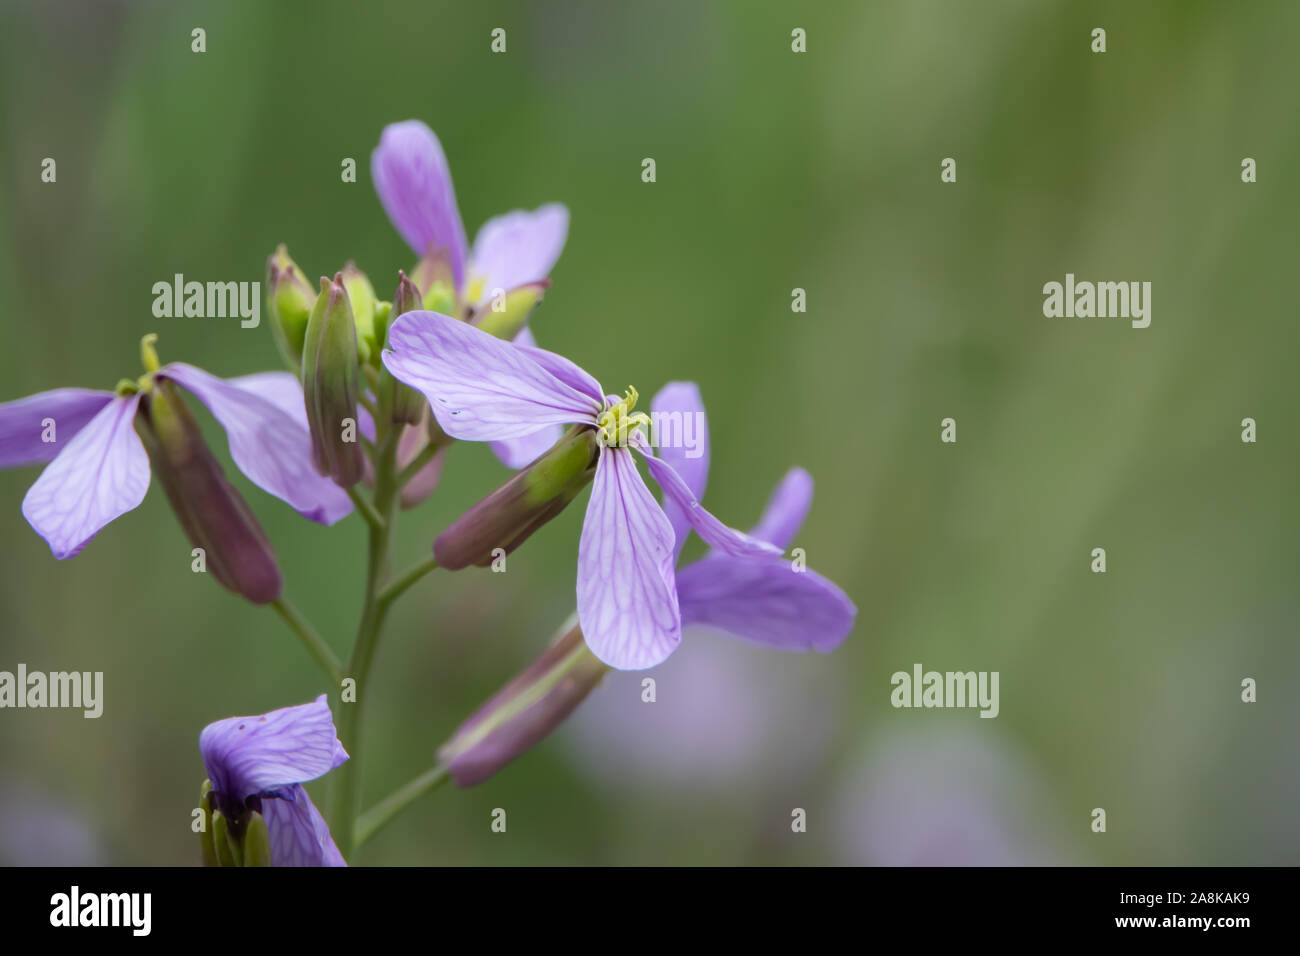 Violet Cabbage Flowers in Bloom in Springtime Stock Photo